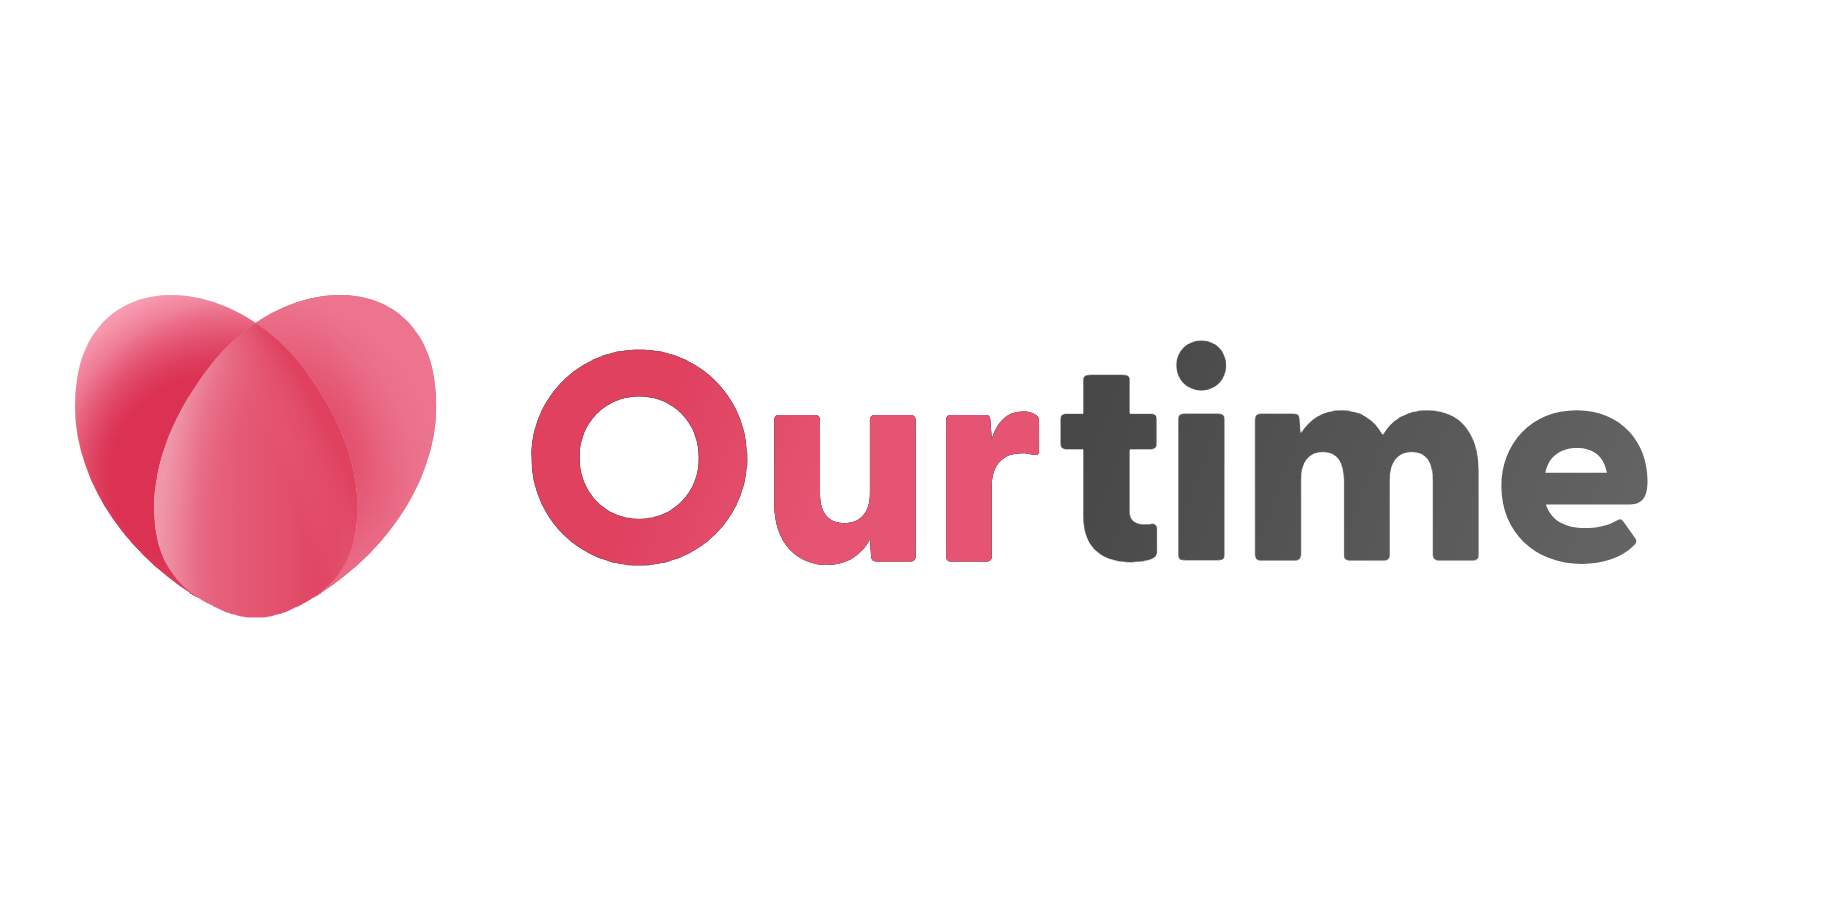 Dating site Ourtime